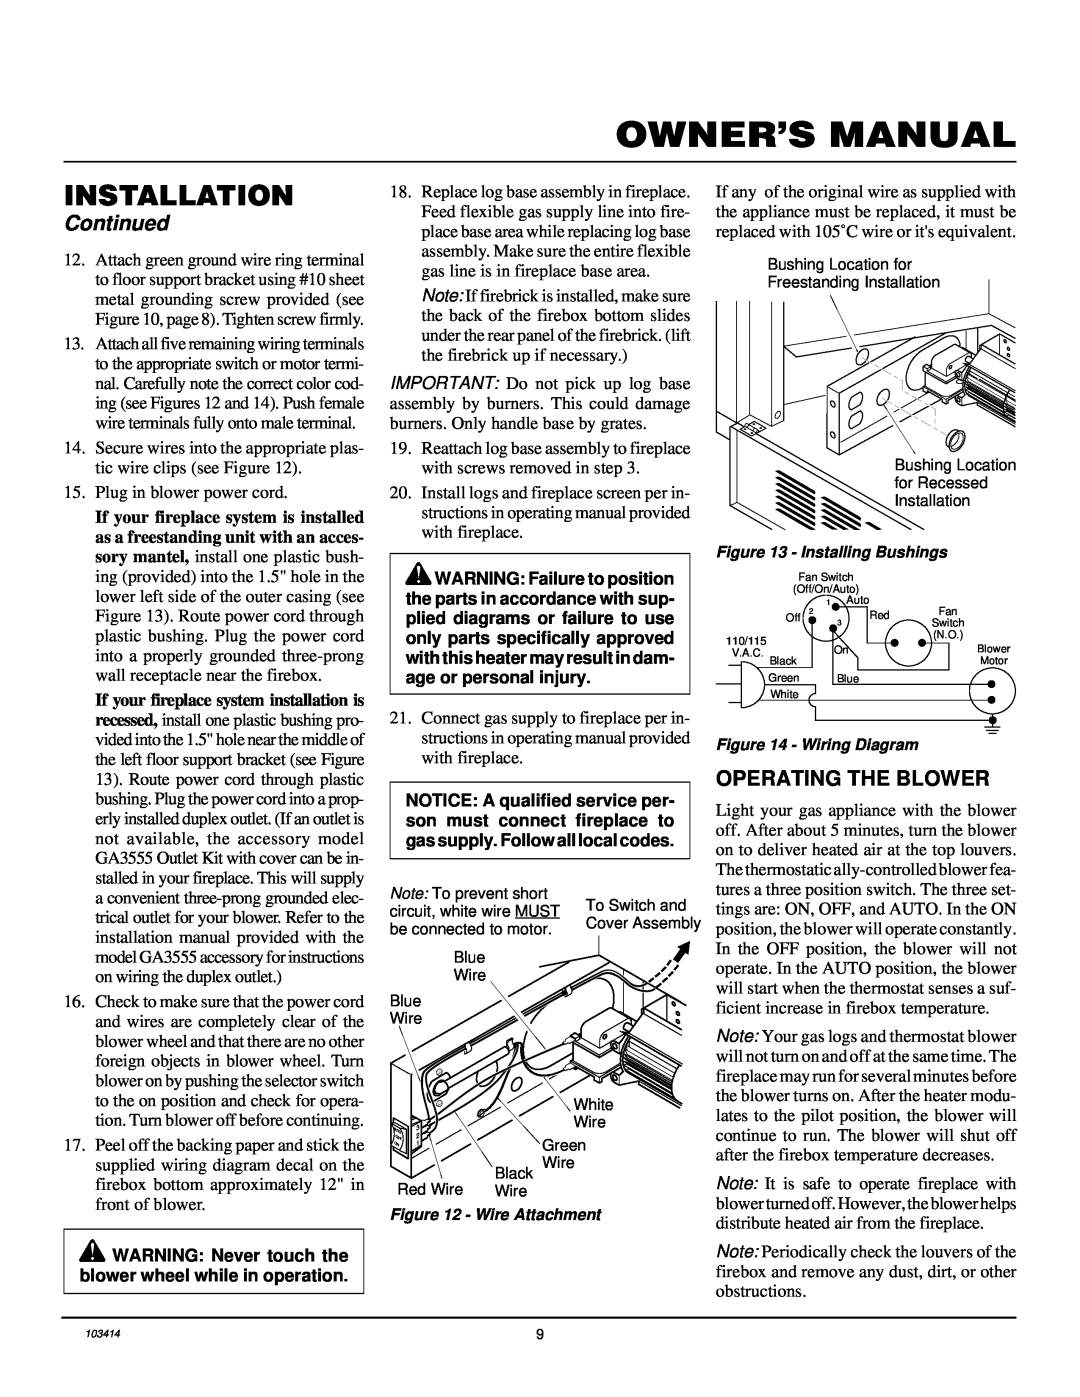 Desa CGFP28PT installation manual Operating The Blower, Installation, Continued, If your fireplace system is installed 